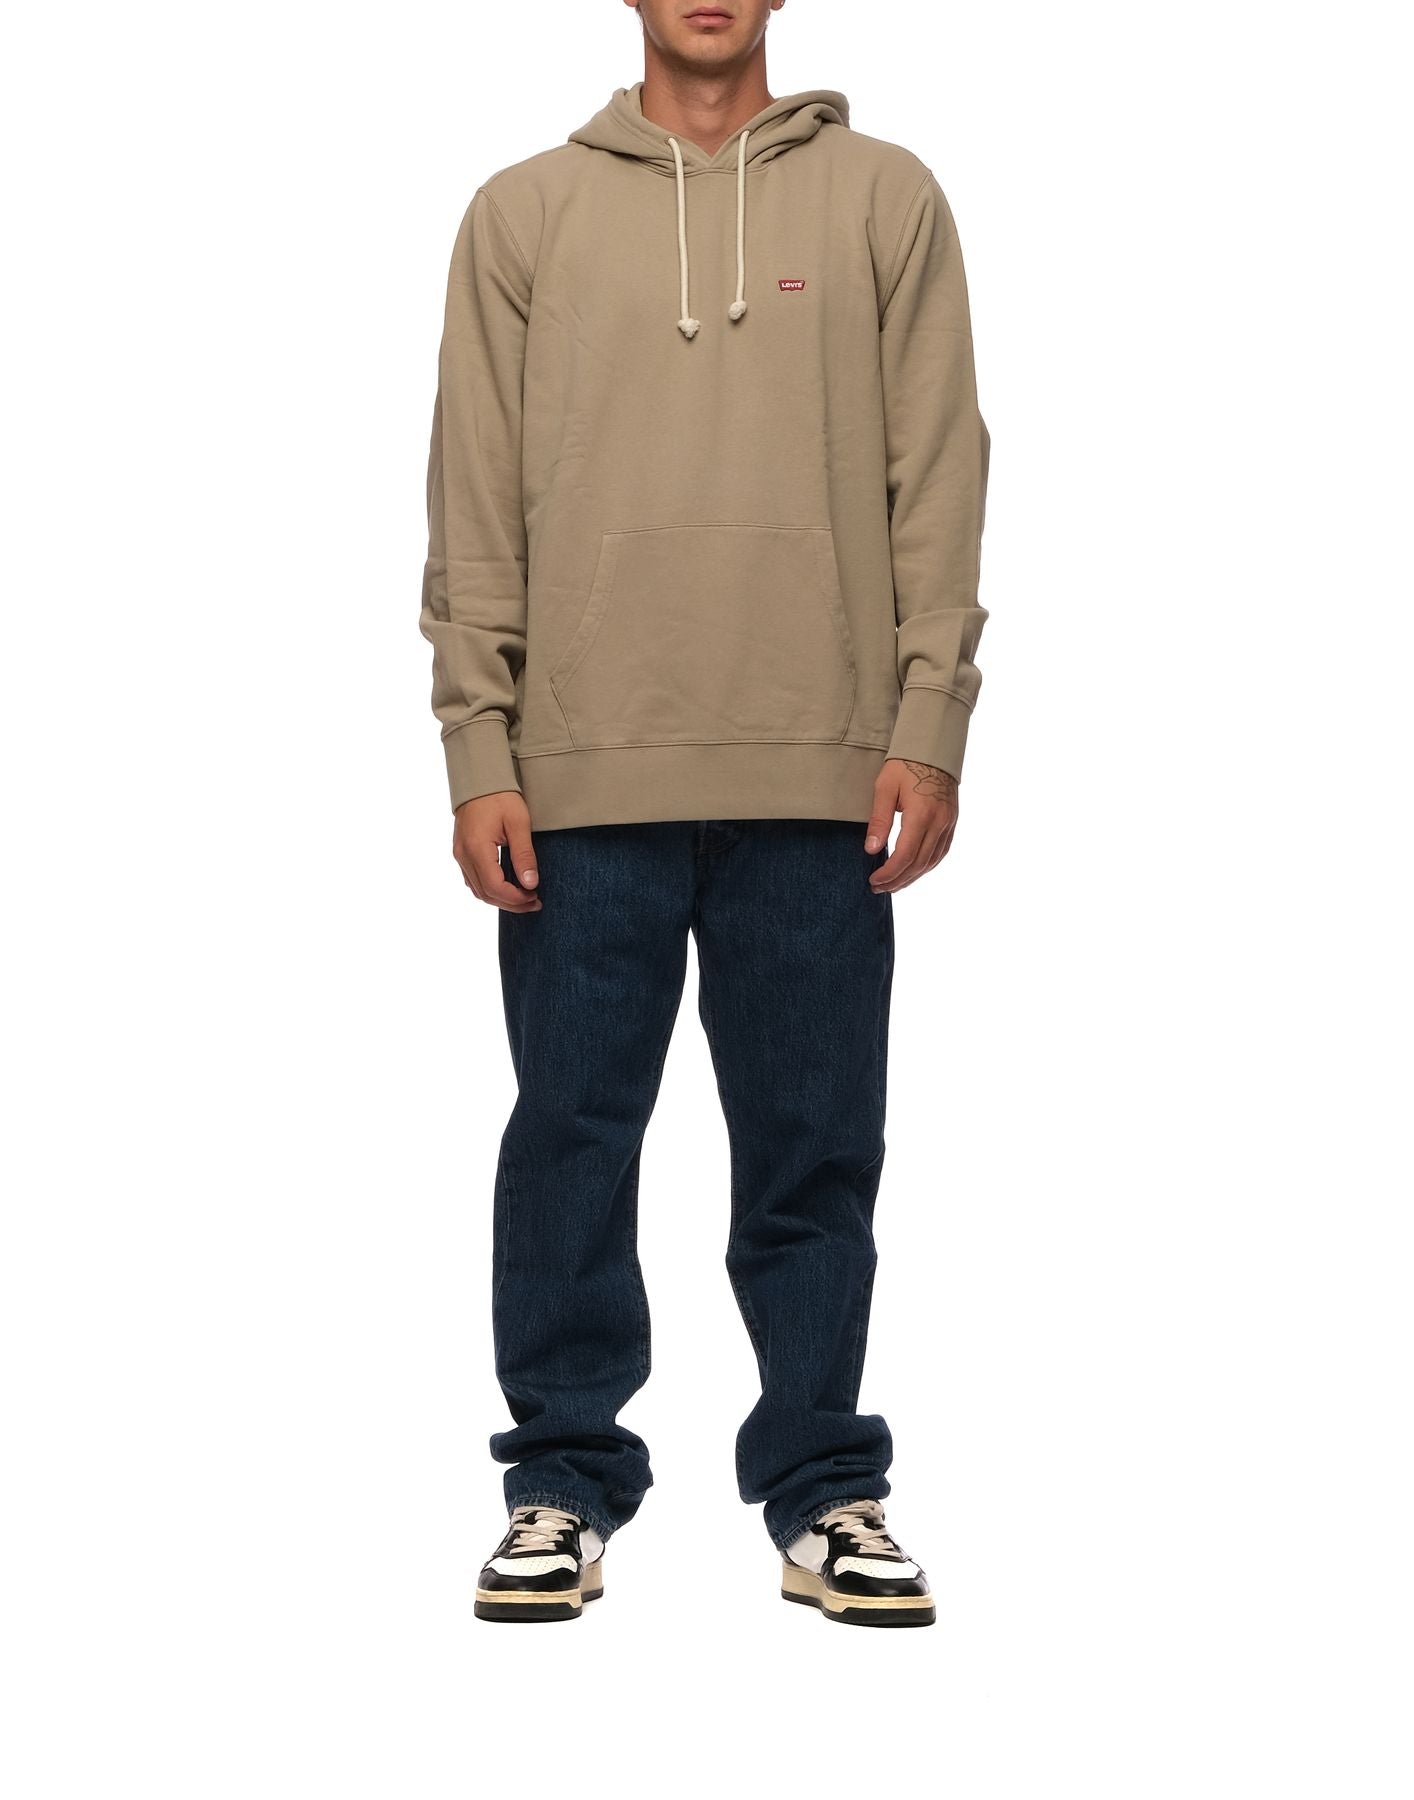 Hoodie for man 34581 0029 SILT Levi's